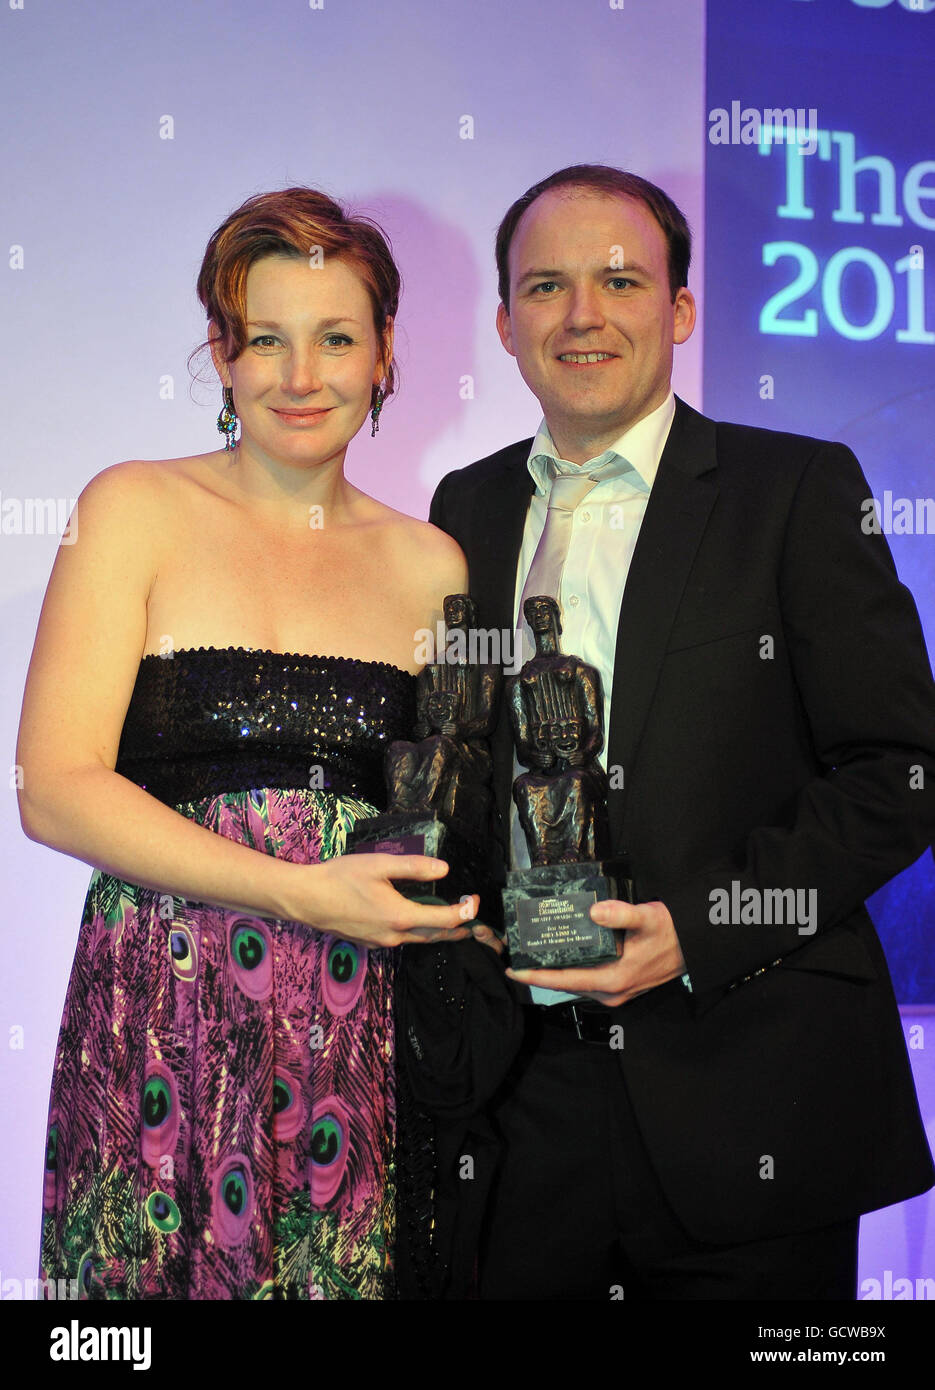 Best Actor Award winner Rory Kinnear and Nancy Carroll, winner of the Natasha Richardson Award for Best Actress, hold their awards at the London Evening Standard Theatre Awards, at the Savoy Hotel. Stock Photo